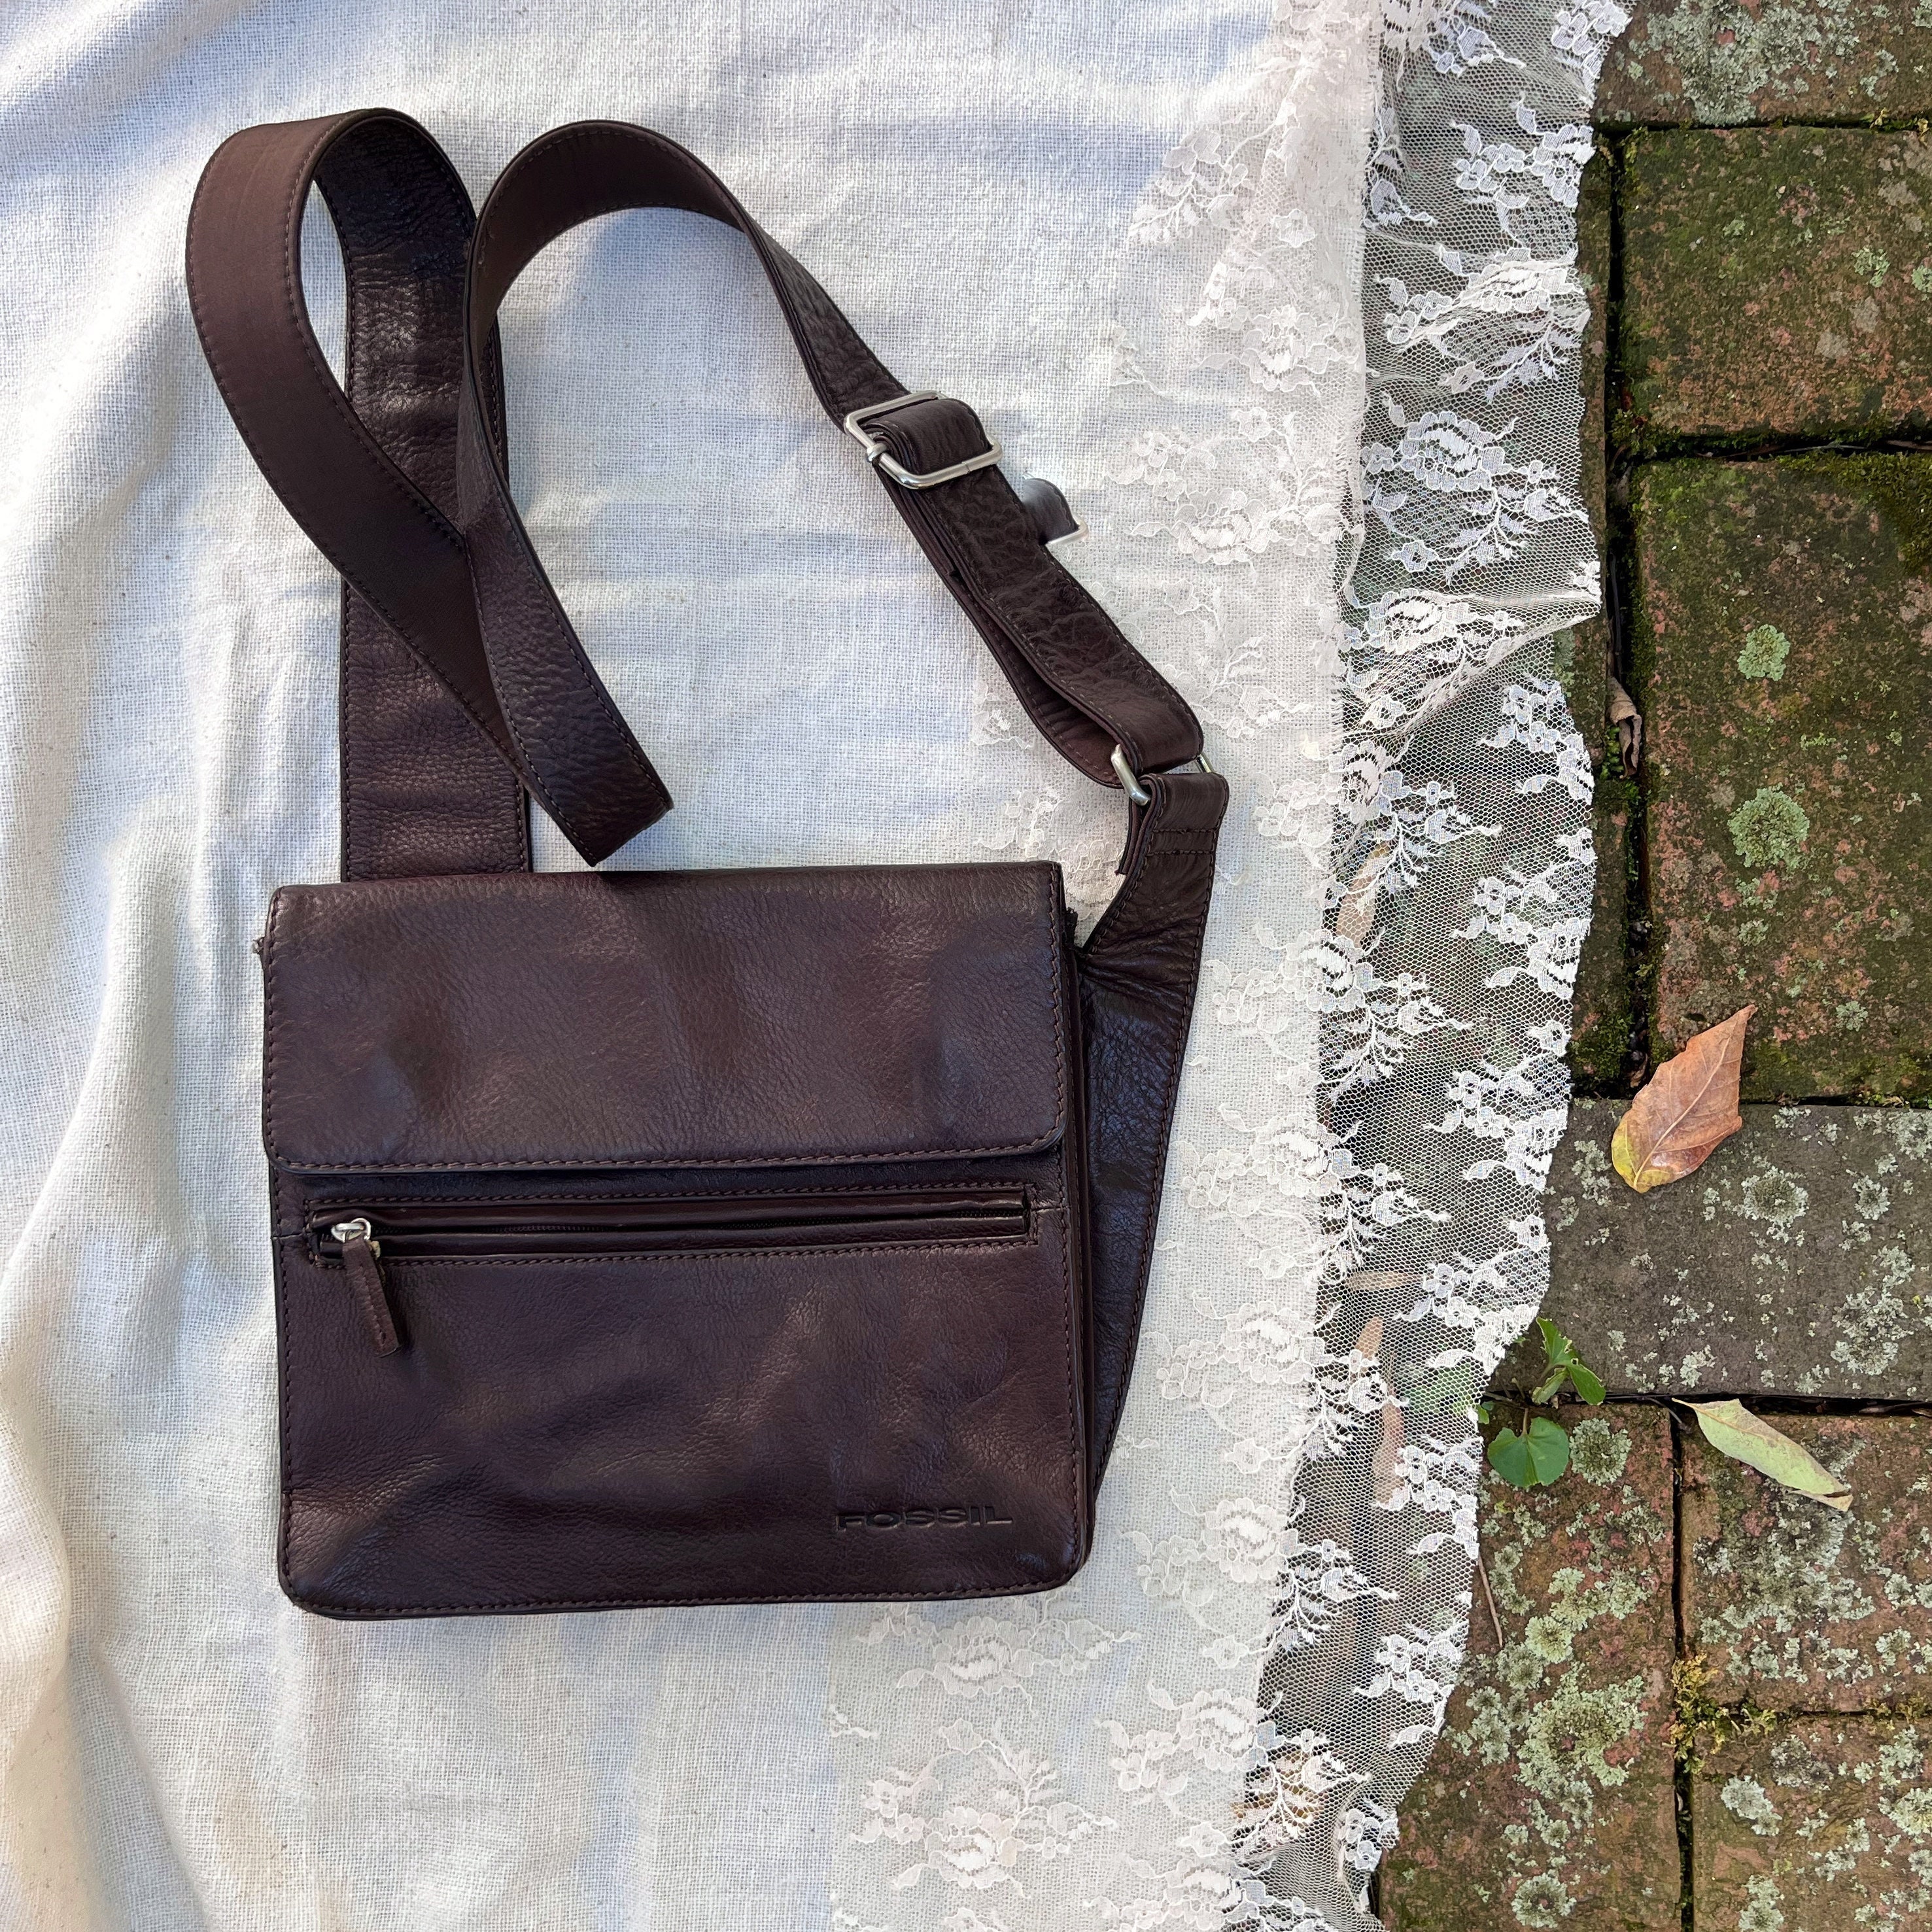 Vintage Fossil Brand Brown Leather Duffle Bag